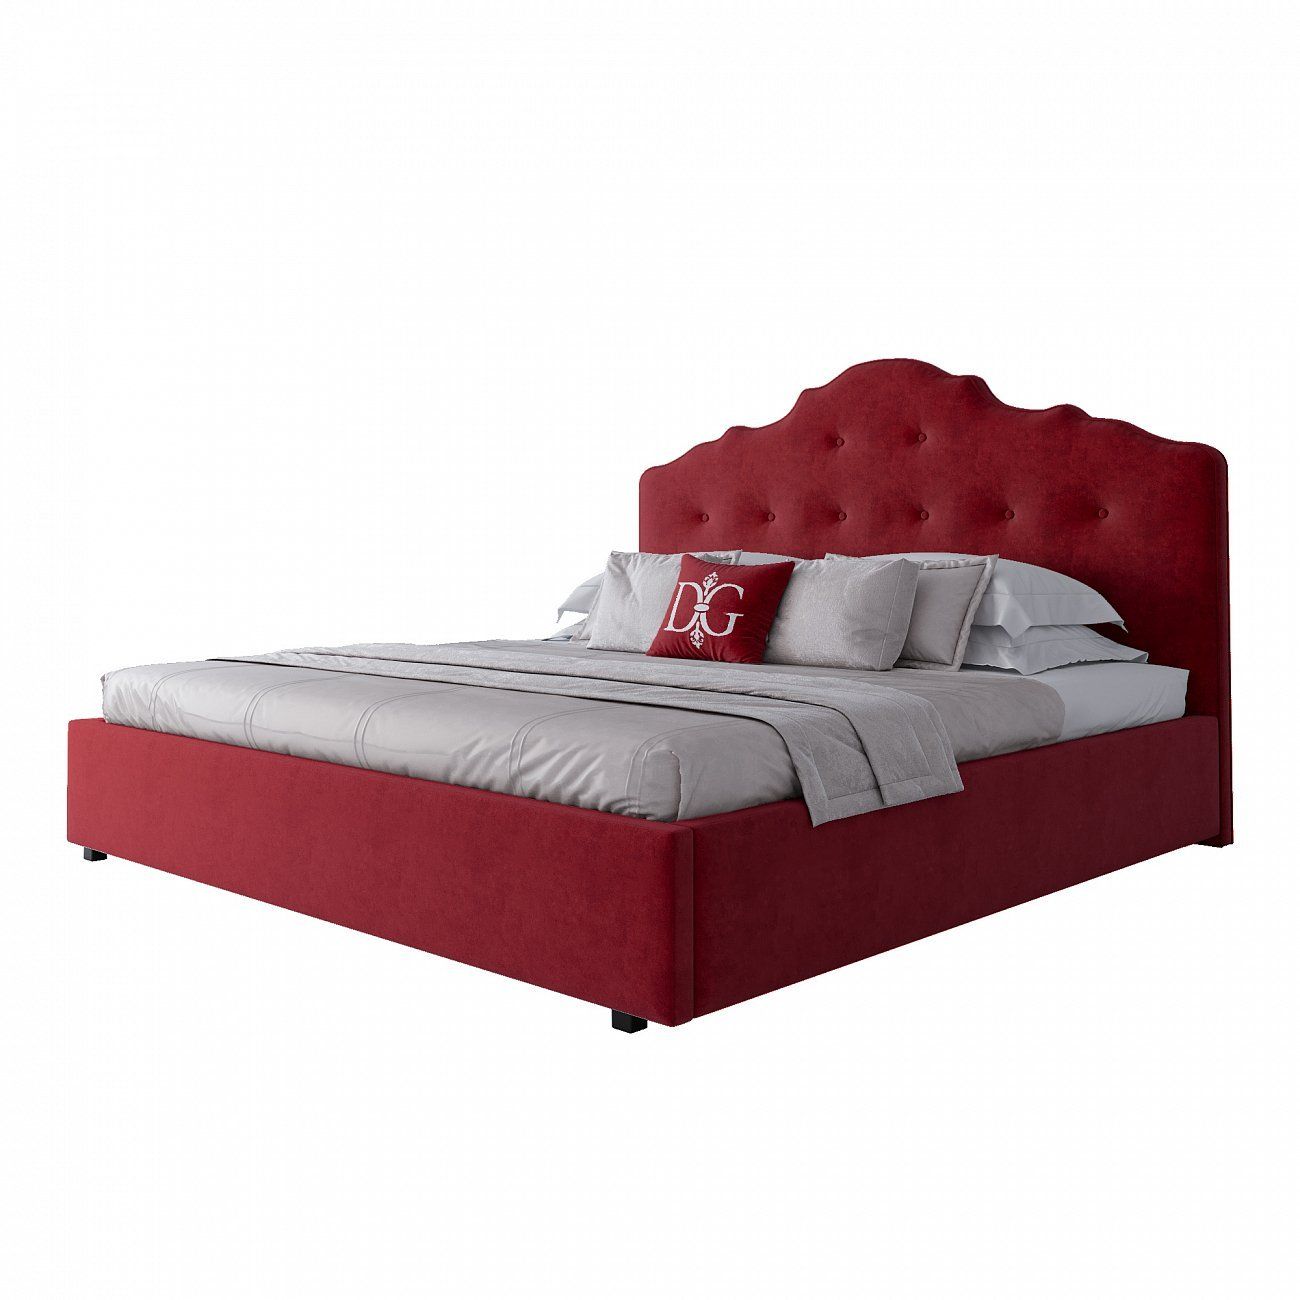 Euro bed with upholstered headboard 200x200 cm red Palace